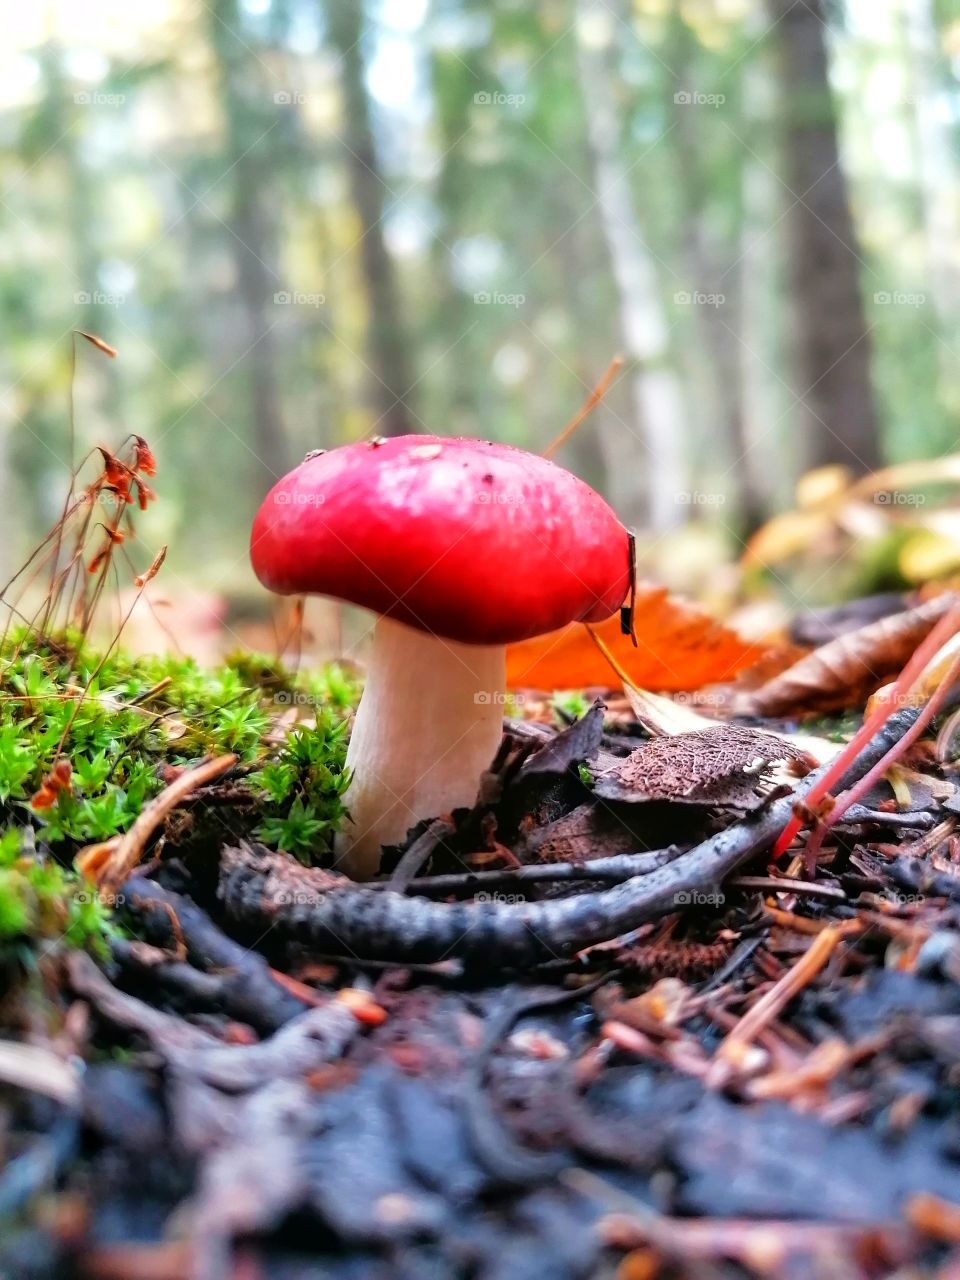 On a day trip in the Finnish forest in September. 🇫🇮🍁🍂